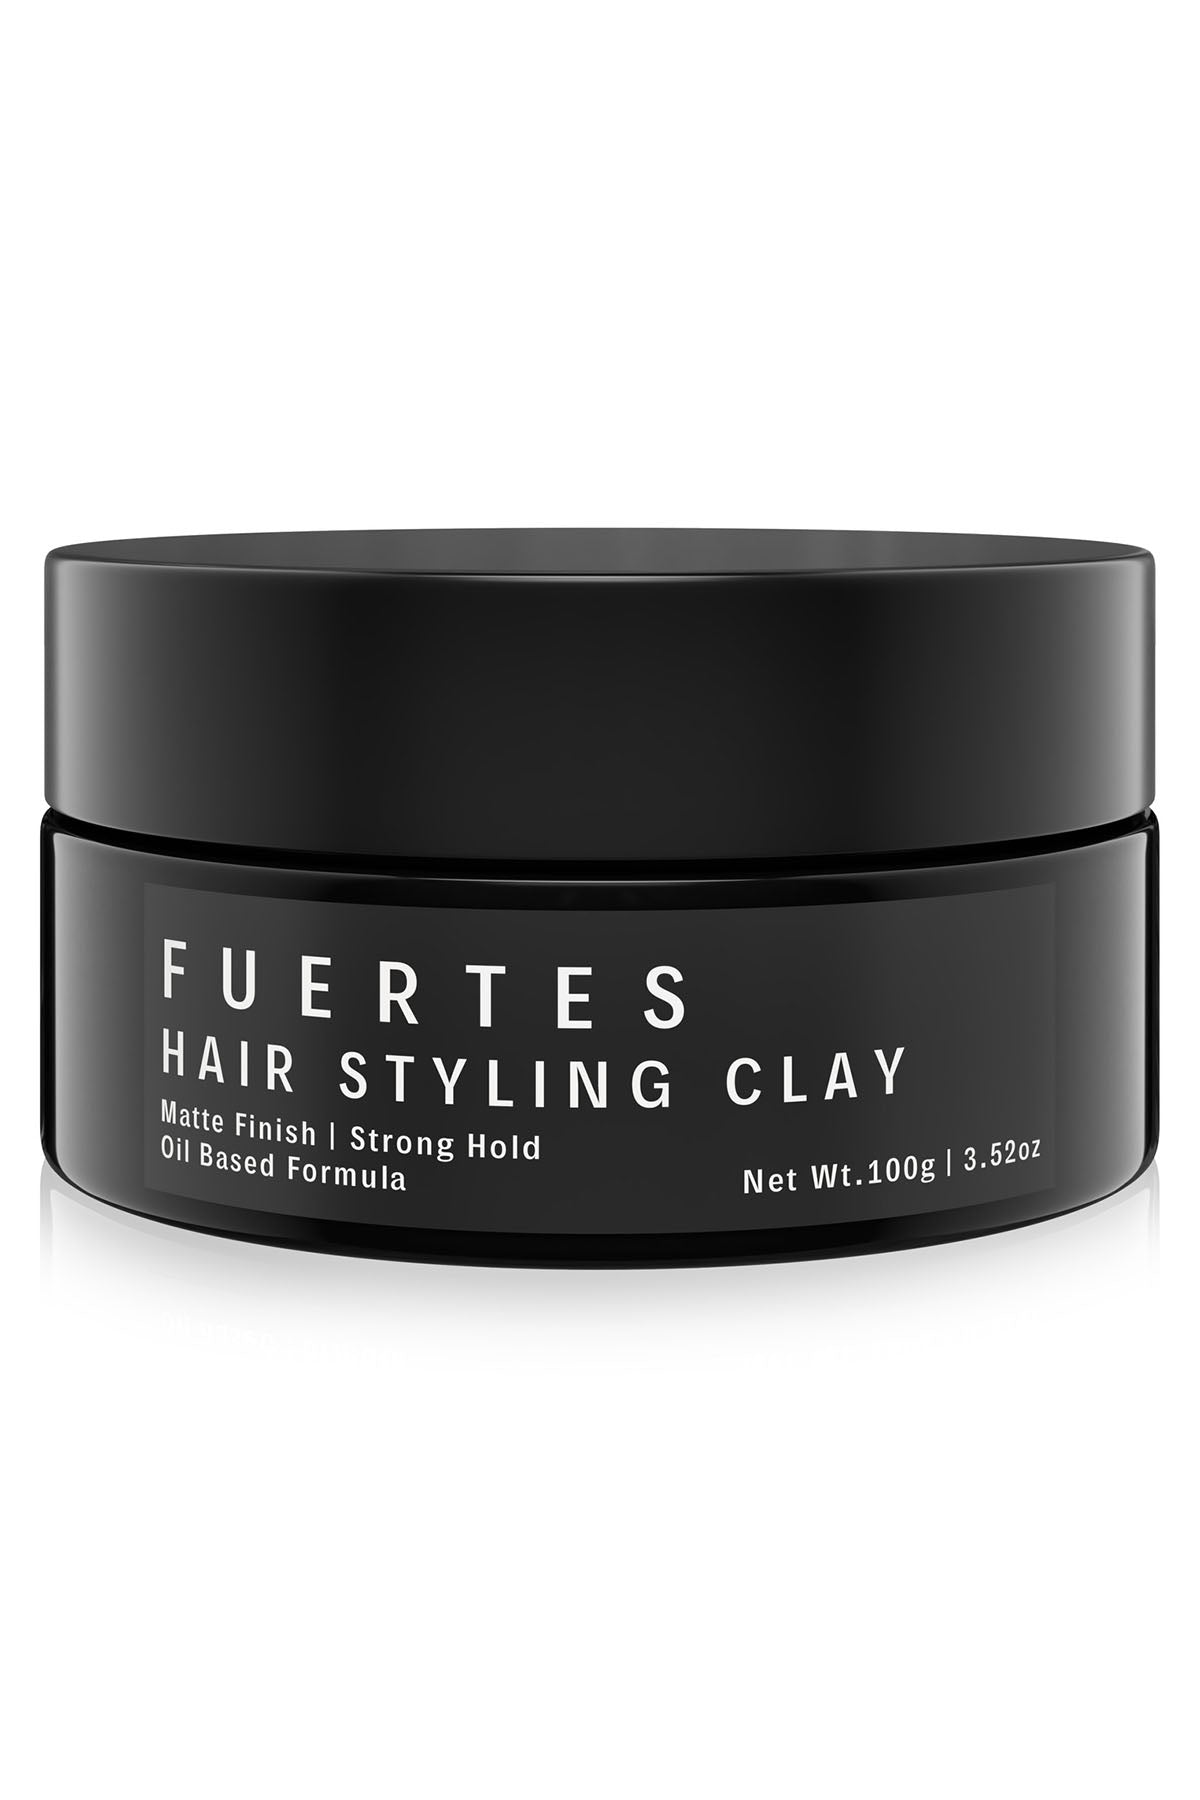 Fuertes Styling Clay Organic Hair Styling Product